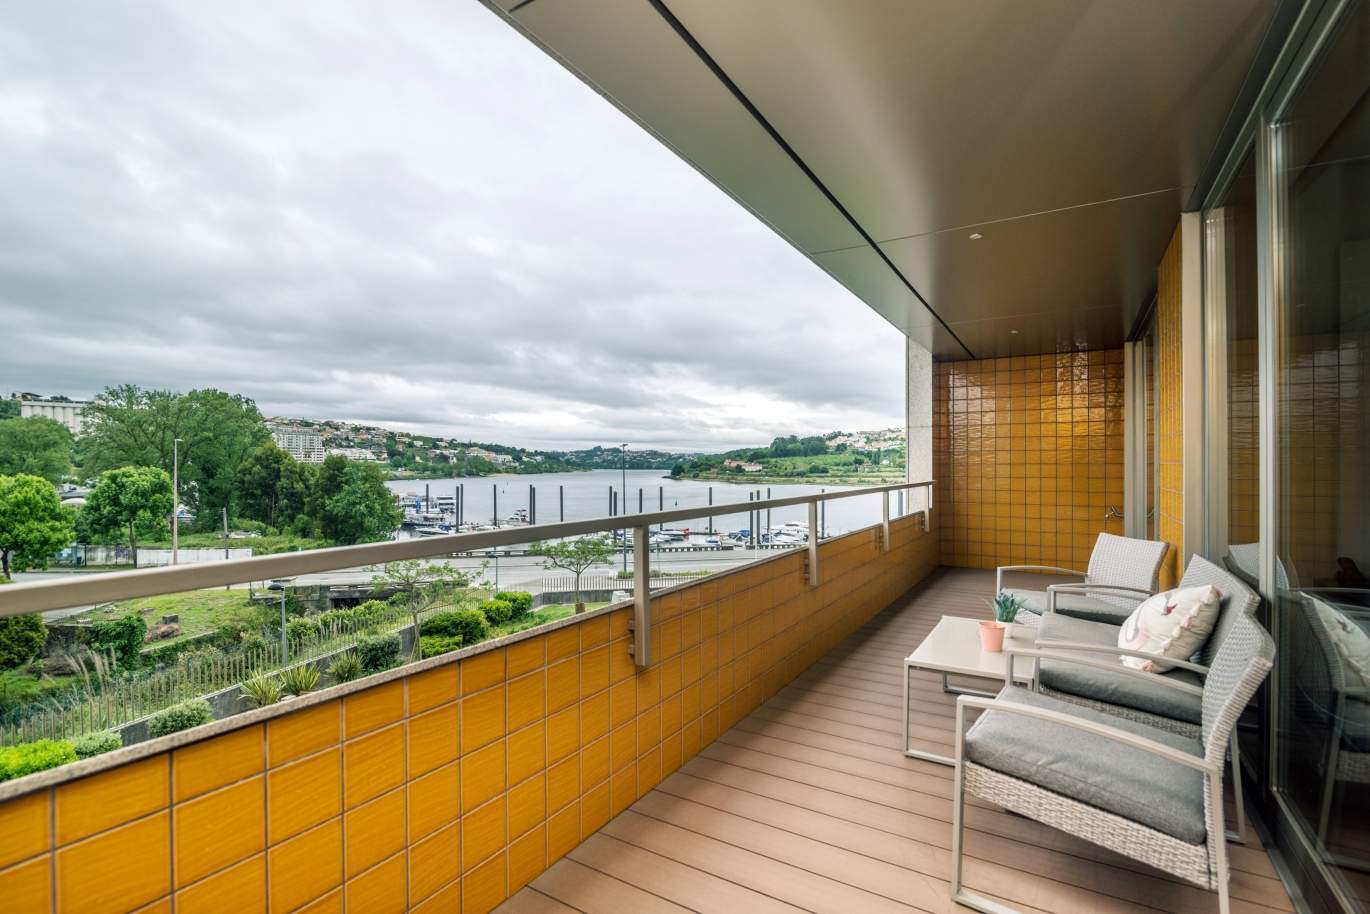 The sale of a luxury apartment with a balcony and a view of the river, the Harbor_104497